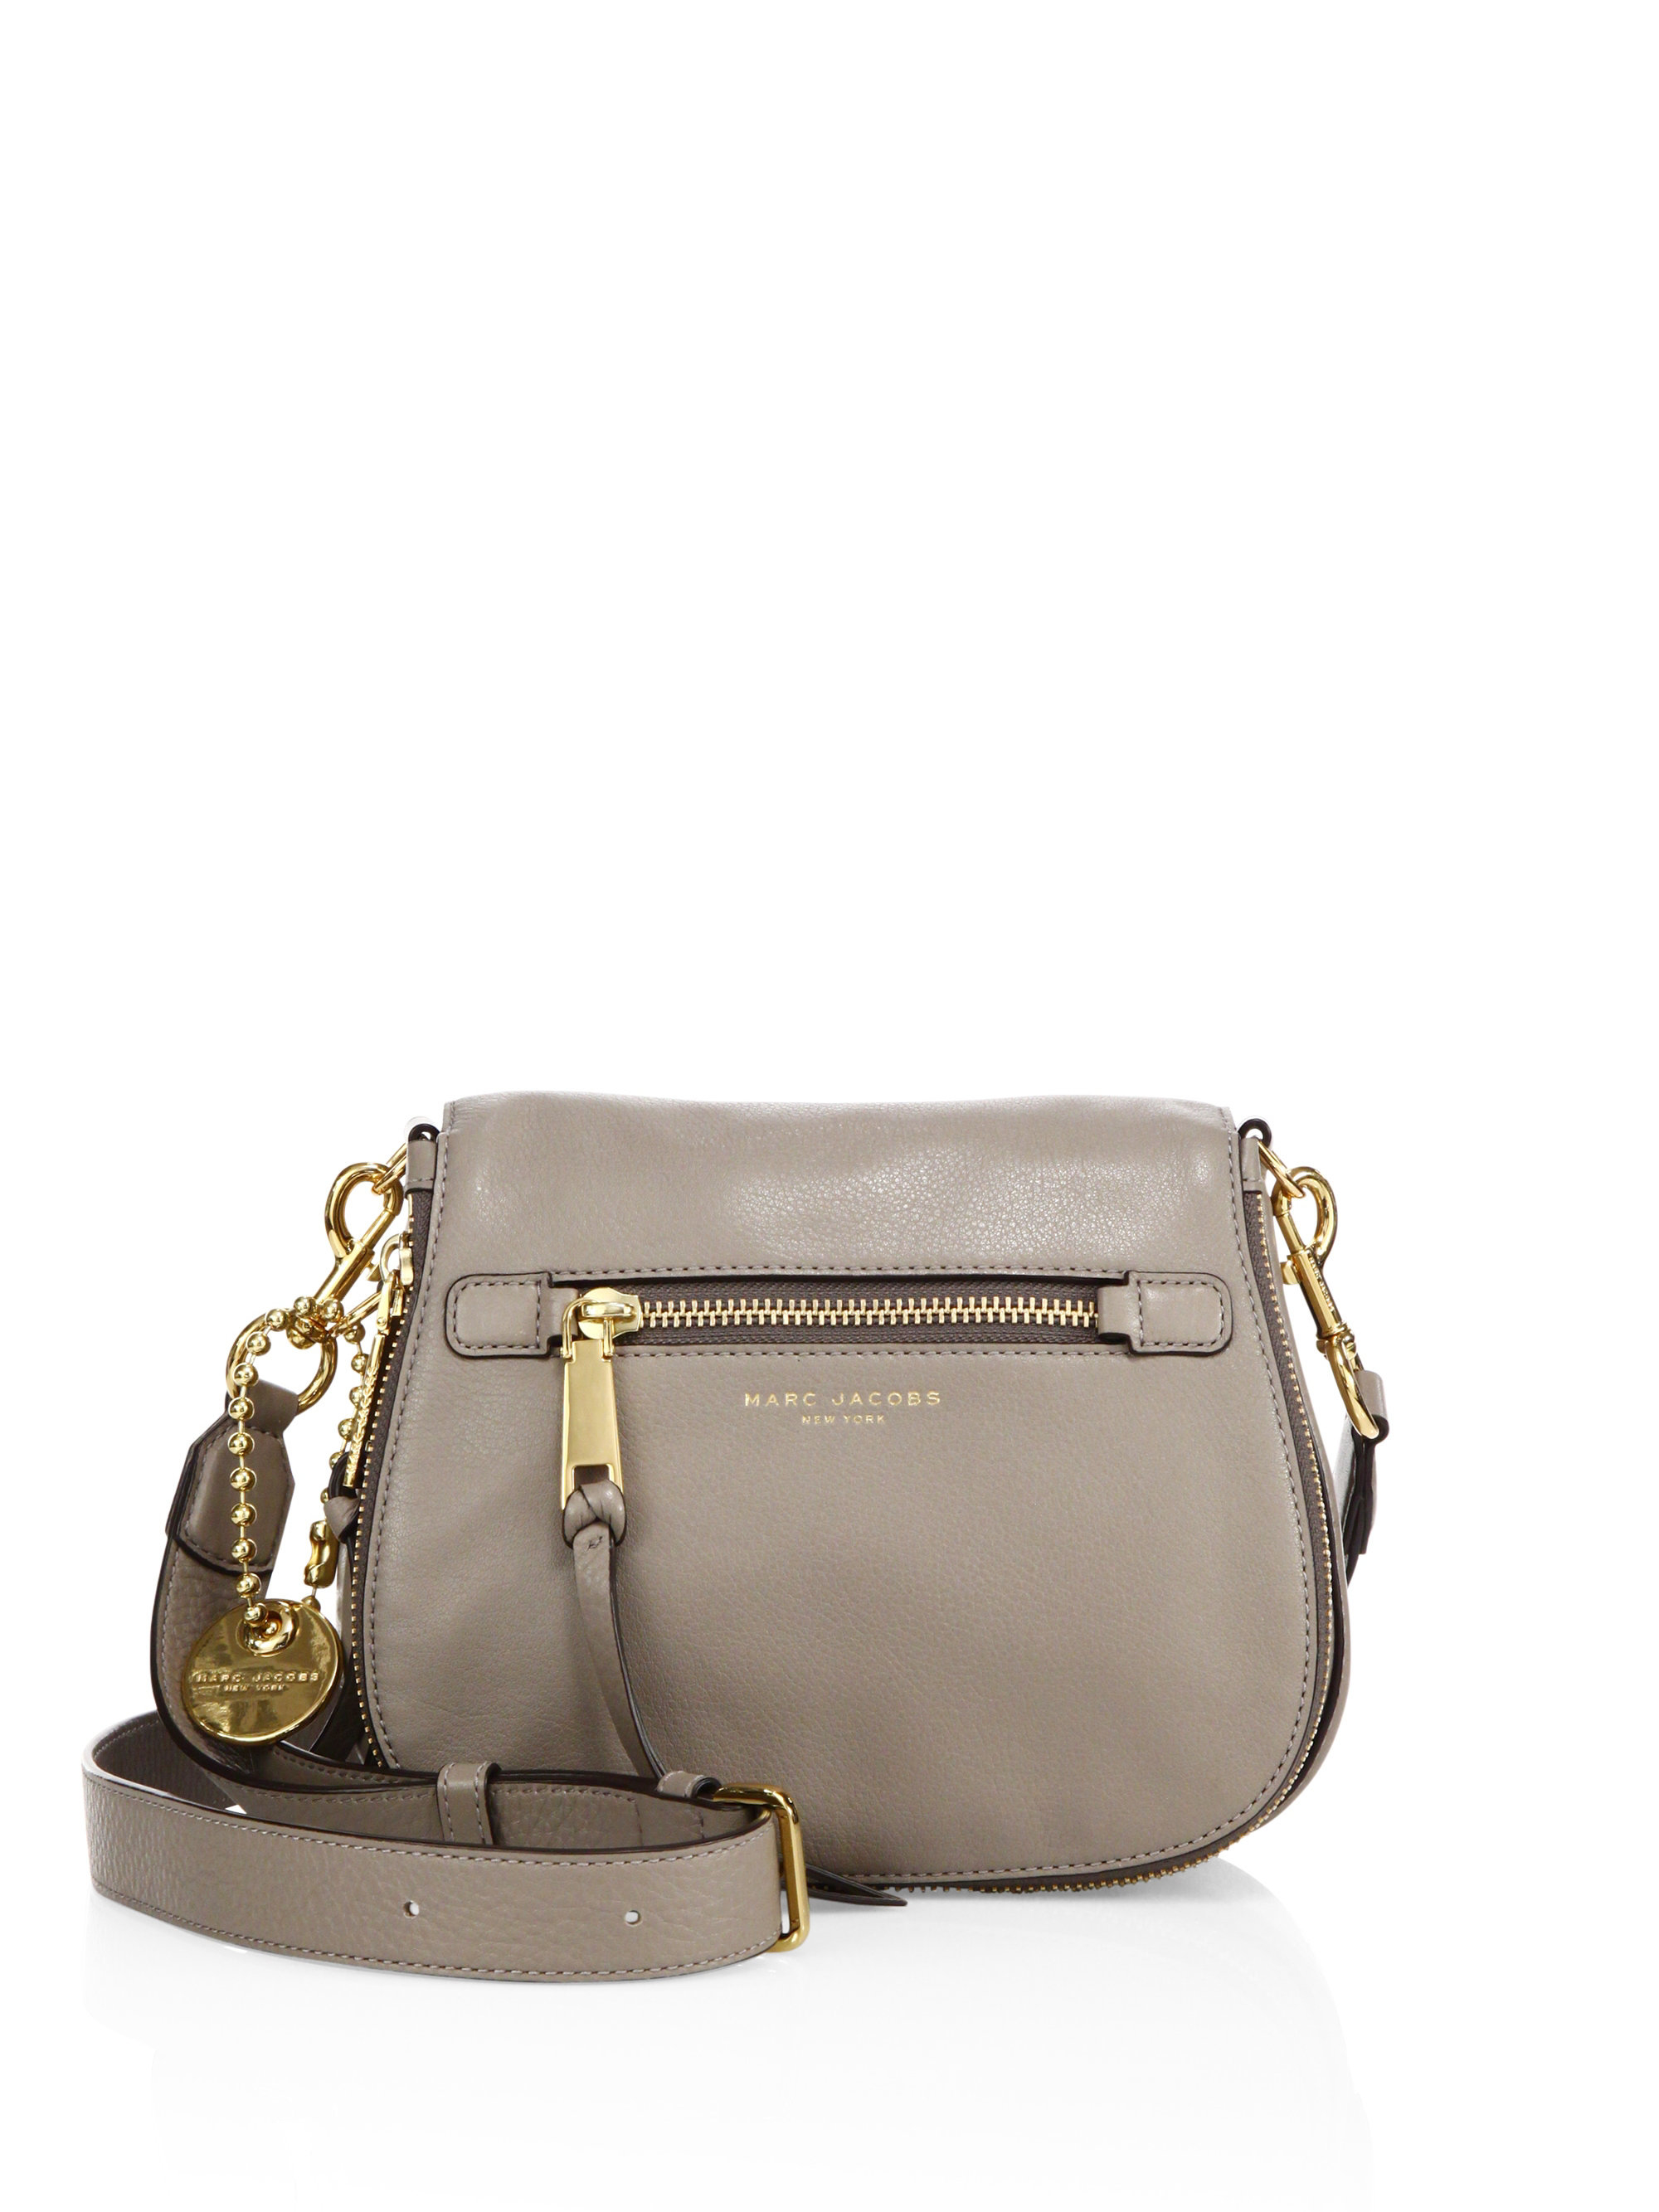 Marc jacobs Recruit Small Leather Saddle Crossbody Bag in Brown | Lyst